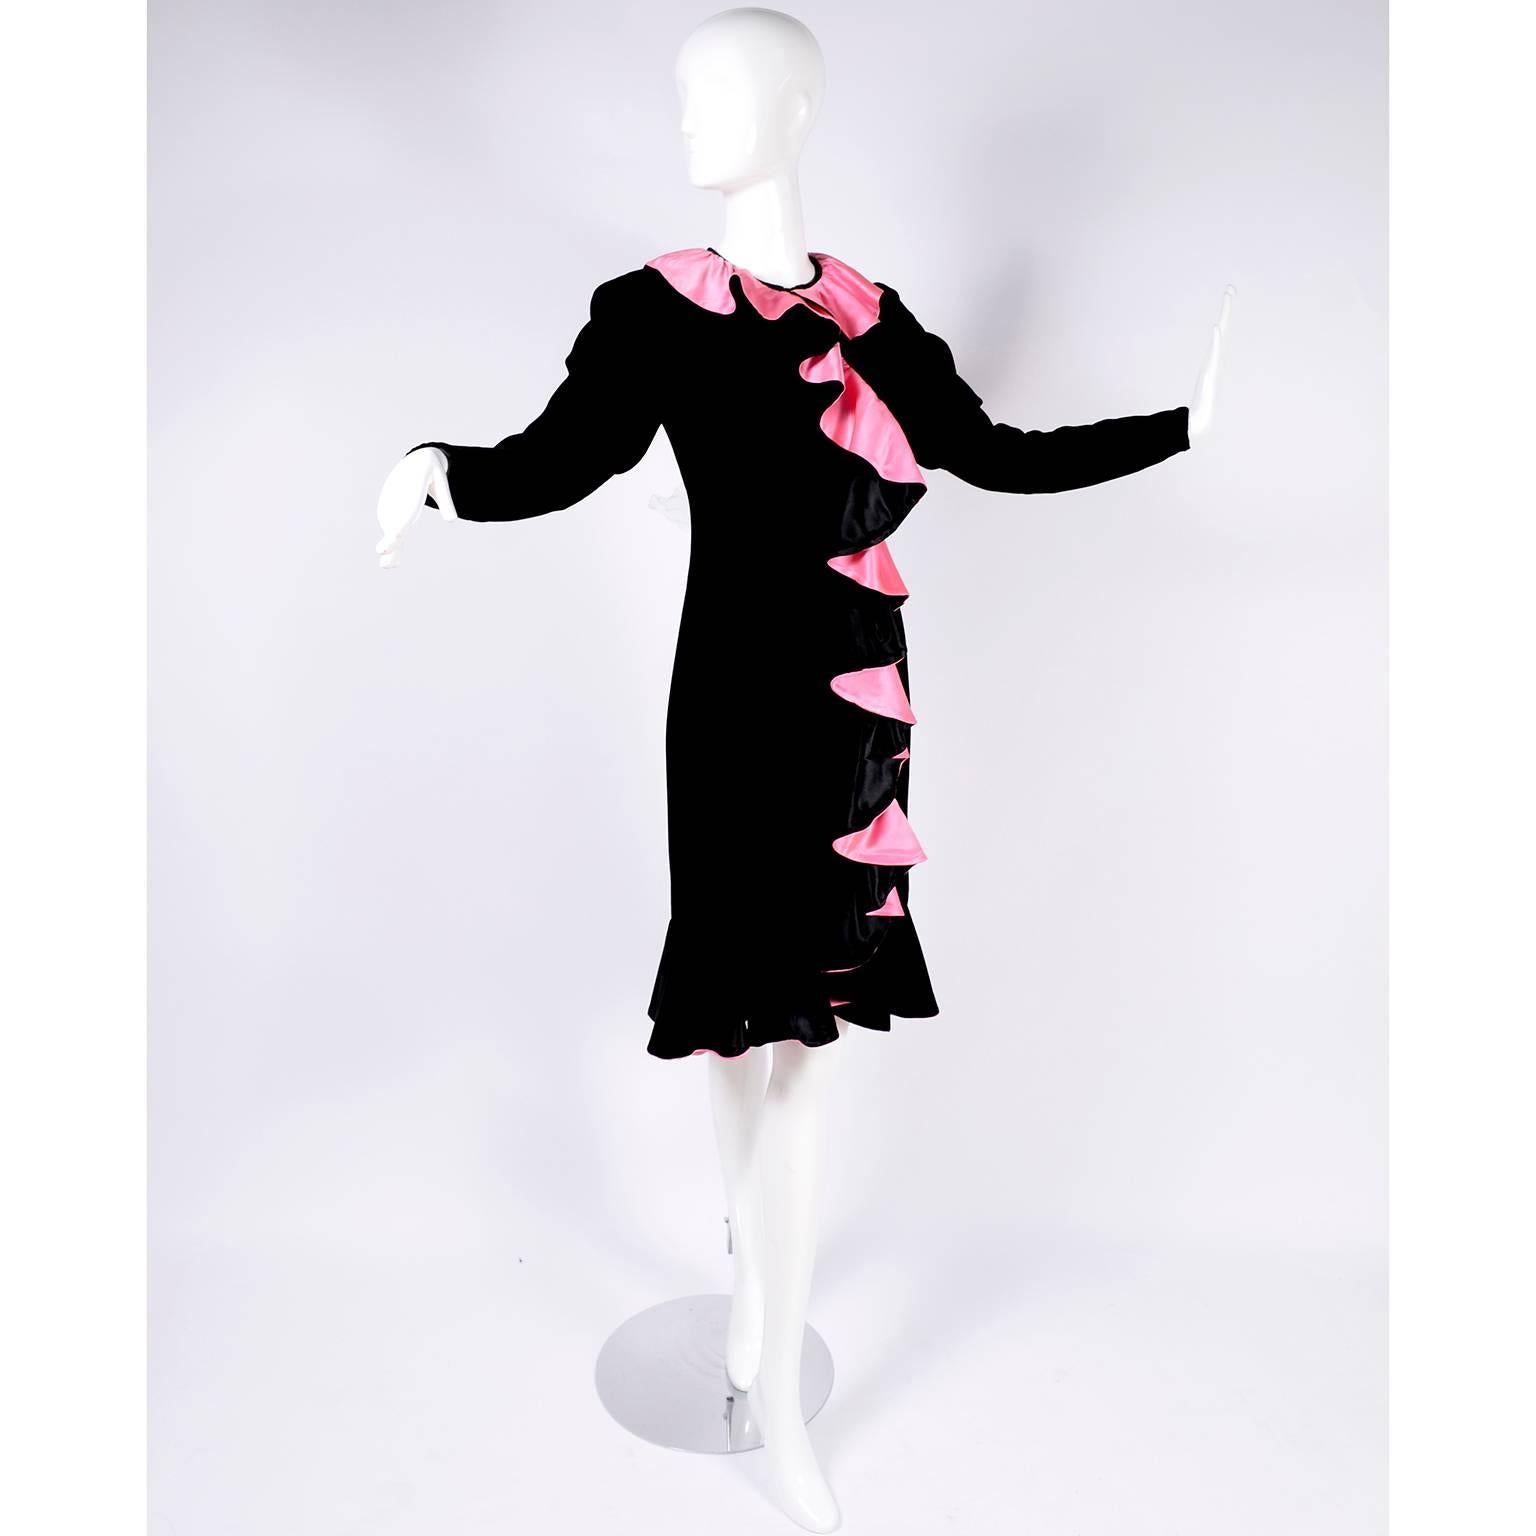 This is such a fun 1980's vintage dress from Oscar de la Renta in black velvet with gorgeous bright pink satin lined ruffles.  We are obsessed with the 80's and this dress is a perfect reason why!  The dress has a somewhat shift style fit, with a